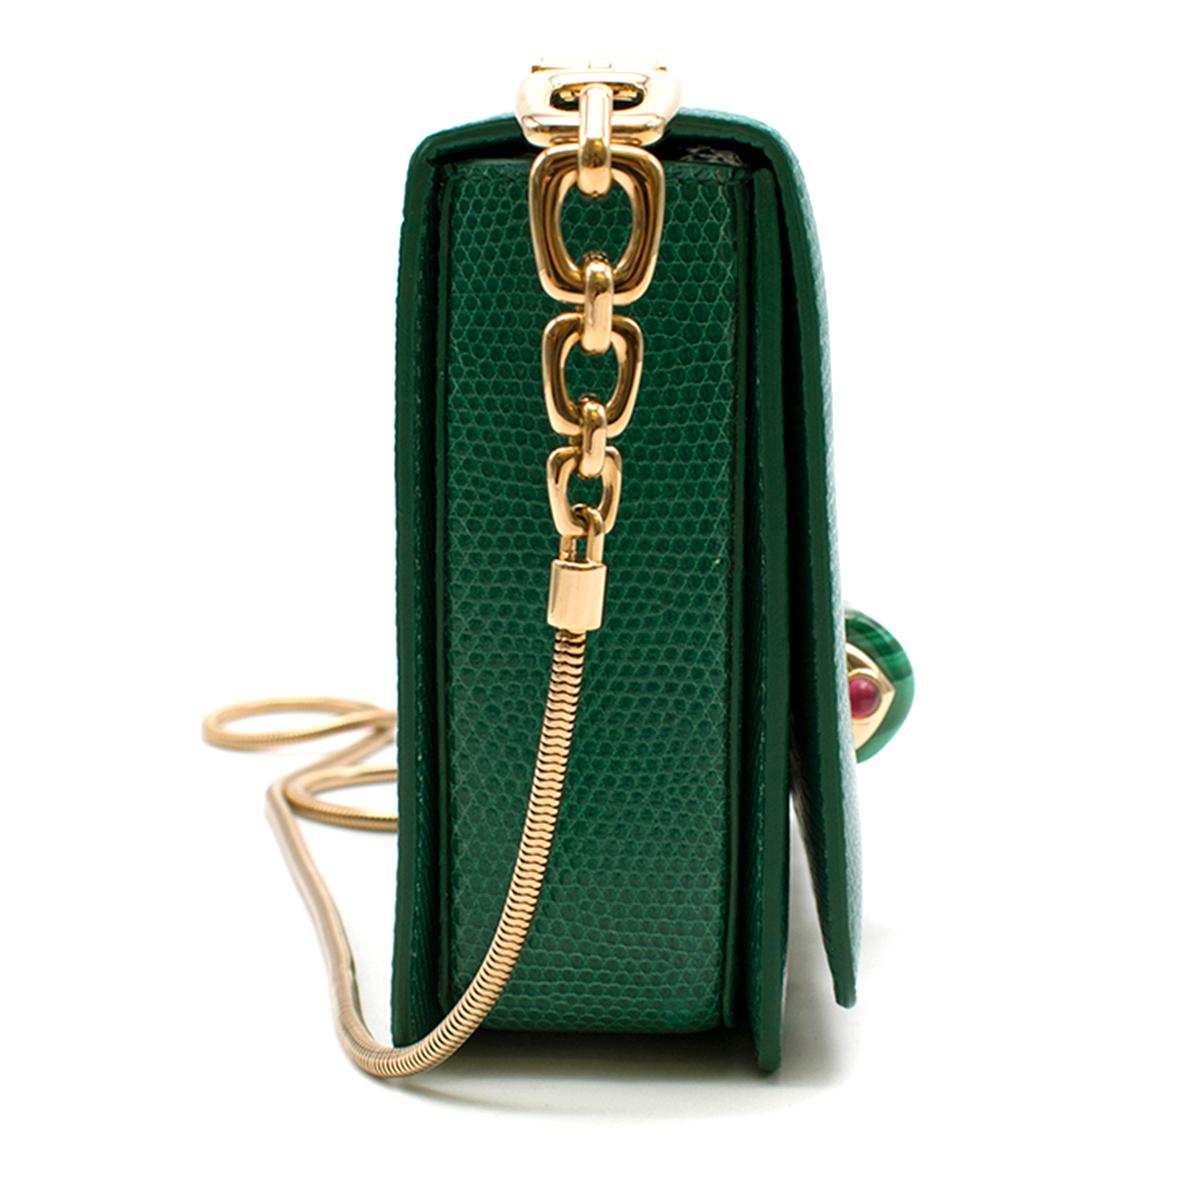 Bvlgari Emerald Green Lizard Box Bag W/ Jade & Cabochon Clasp

- Lizard leather mini box shoulder bag 
- Embellished with jade & pink cabochon clasp to the front
- Gold tone metal chain 
- Gold tone plate to the top of the bag with chain
- Flap